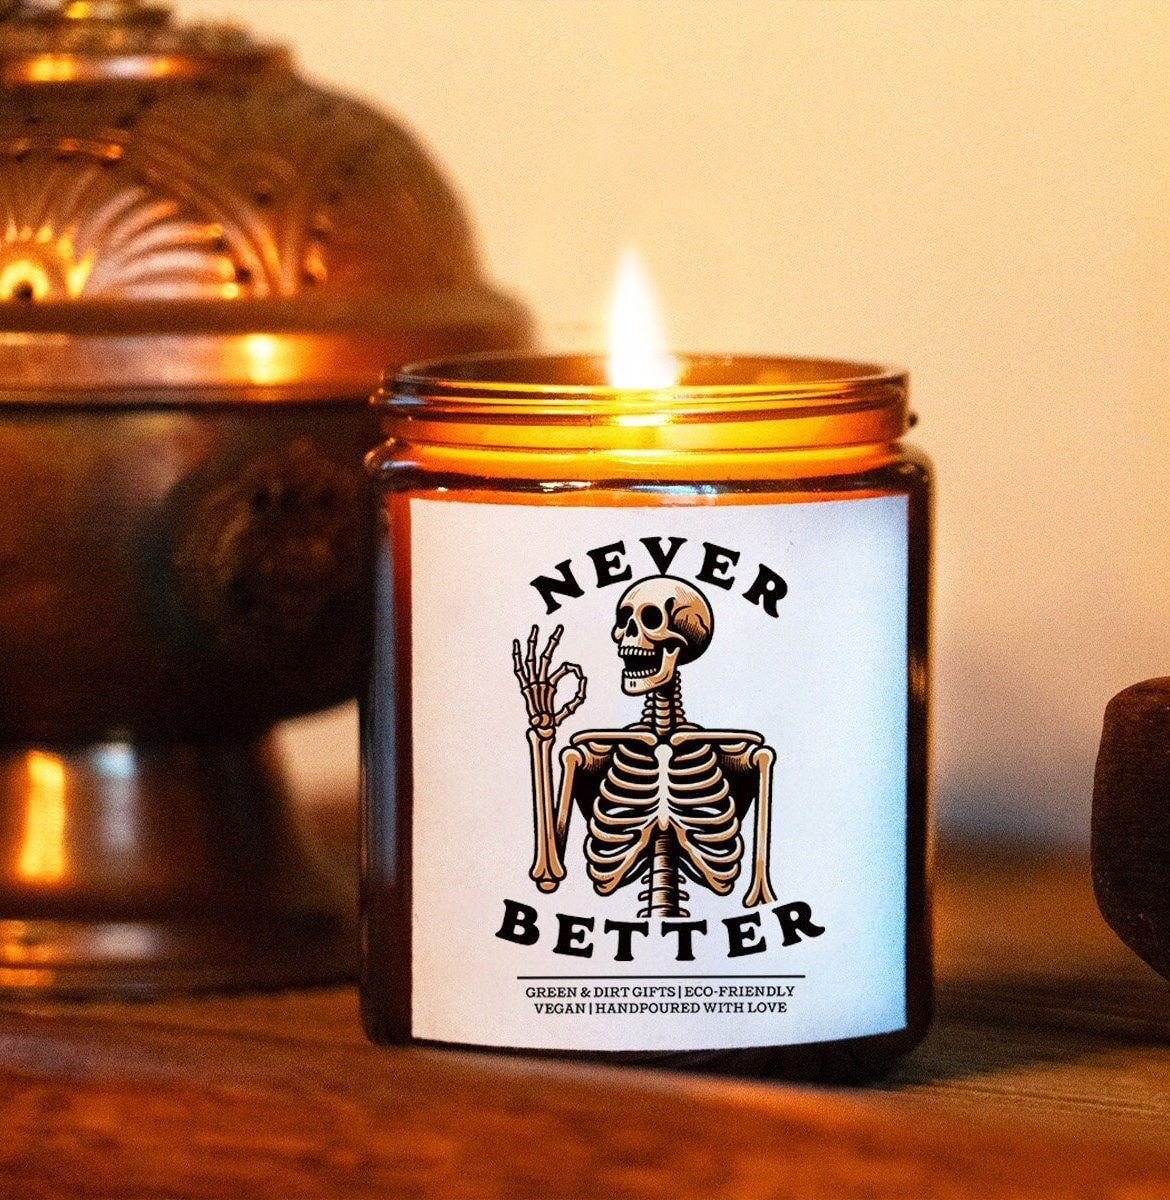 Never Better Self Care gift box -9oz Candle -Self Care Gift Box, Care Package For Her, Gift Baskets for Women, Get Well Soon, Funny Gift